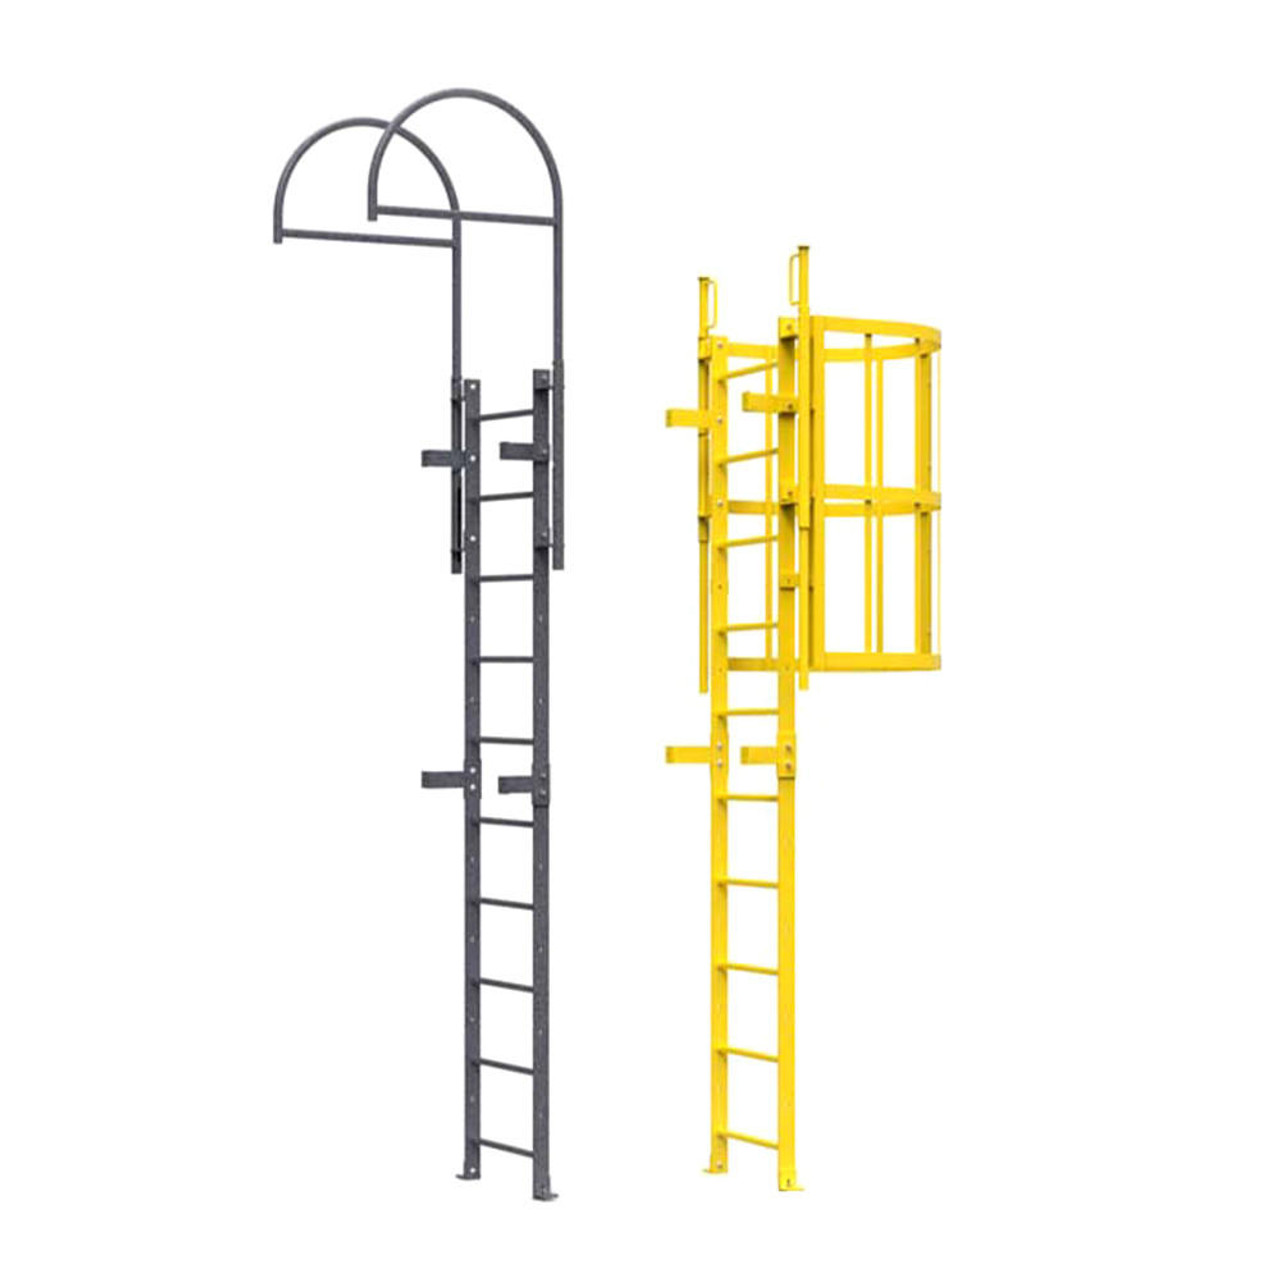 8'0 Ladder Extension for Roof Hatches - Best